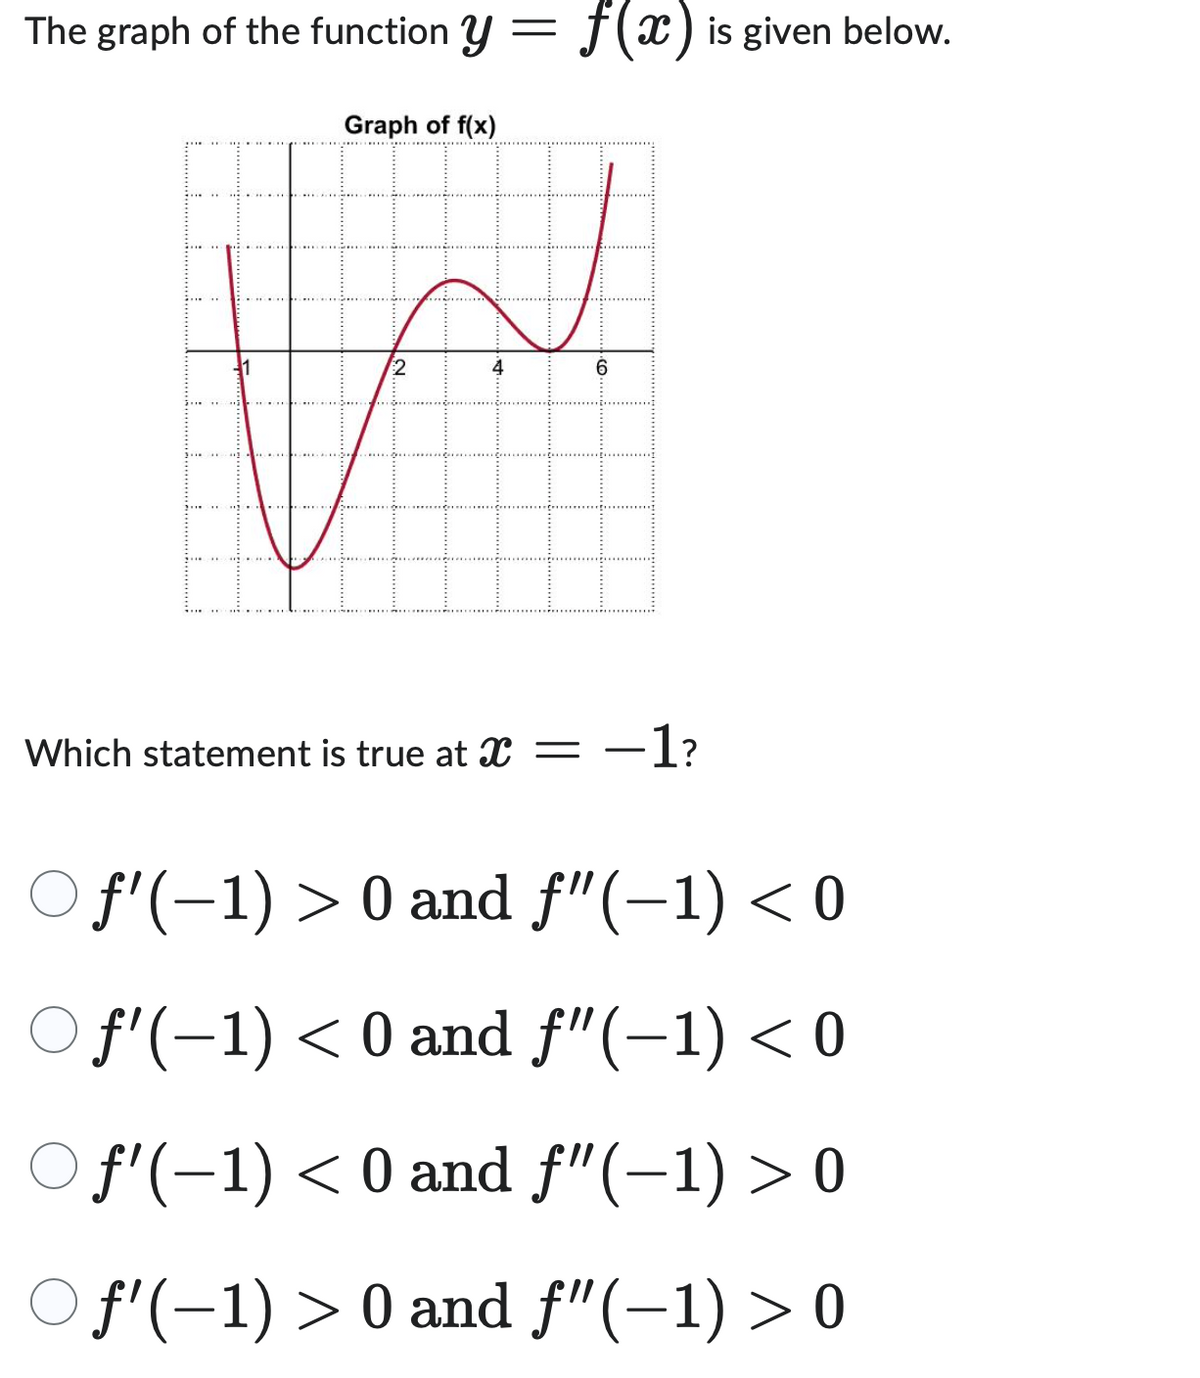 The graph of the function y = f(x) is given below.
Graph of f(x)
Which statement is true at x =
6
-1?
○ f'(−1) > 0 and ƒ"(−1) < 0
○ f'(-1) < 0 and ƒ"(−1) < 0
O f'(-1) < 0 and ƒ"(−1) > 0
ƒ'(−1) > 0 and ƒf"(−1) > 0